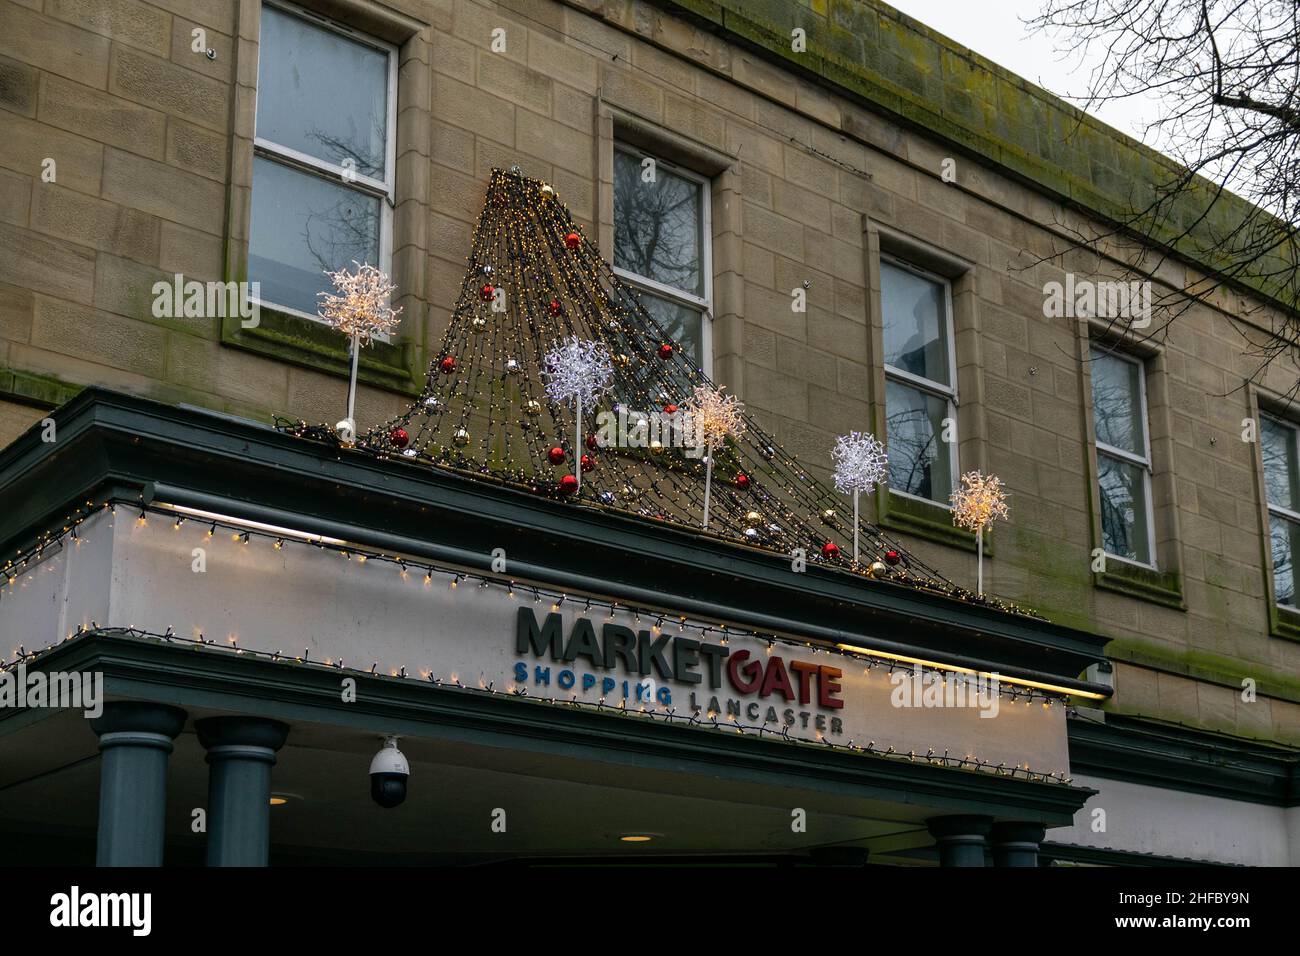 Lancaster, UK - 4th January 2020 - MarketGate Shopping Centre in city centre Lancaster, Lancashire with festive Christmas decorations welcoming shops Stock Photo